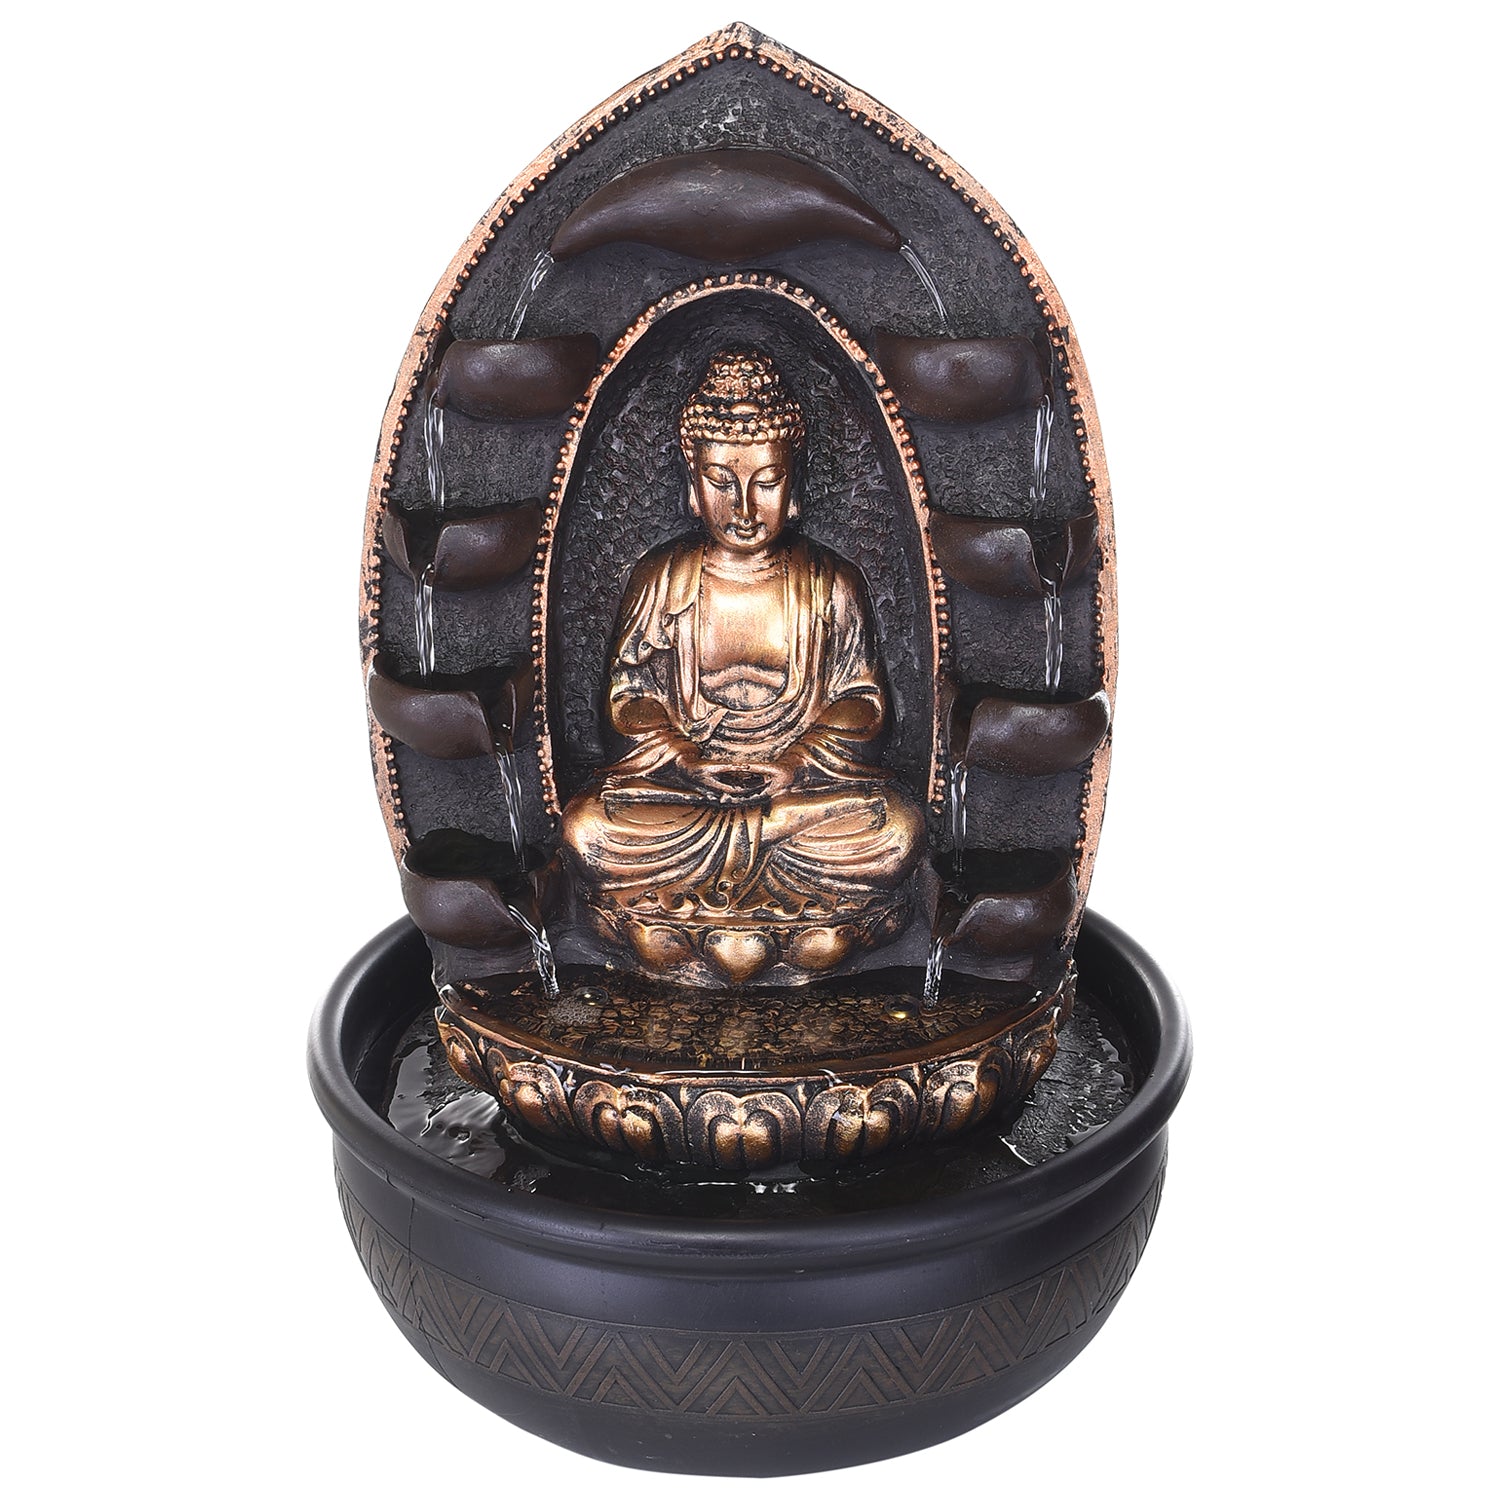 Polystone Brown and Golden Lotus Meditating Buddha Idol Water Fountain With Crystal Ball for Home/Office Decor 4